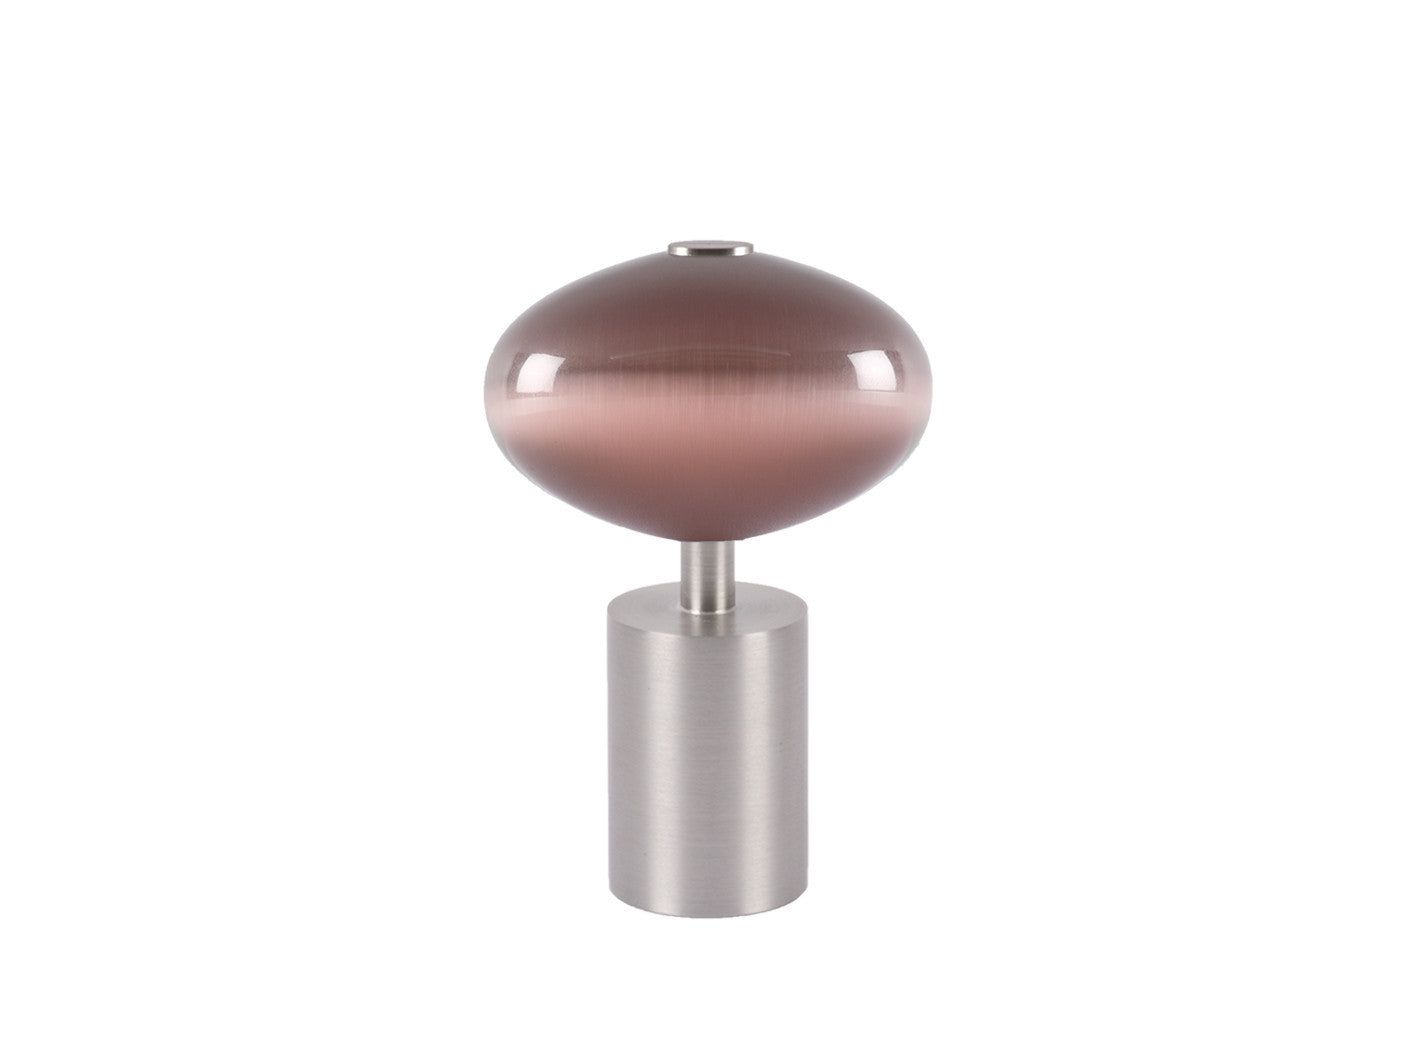 Glass moonstone finial in crocus pink | Walcot House 30mm collection